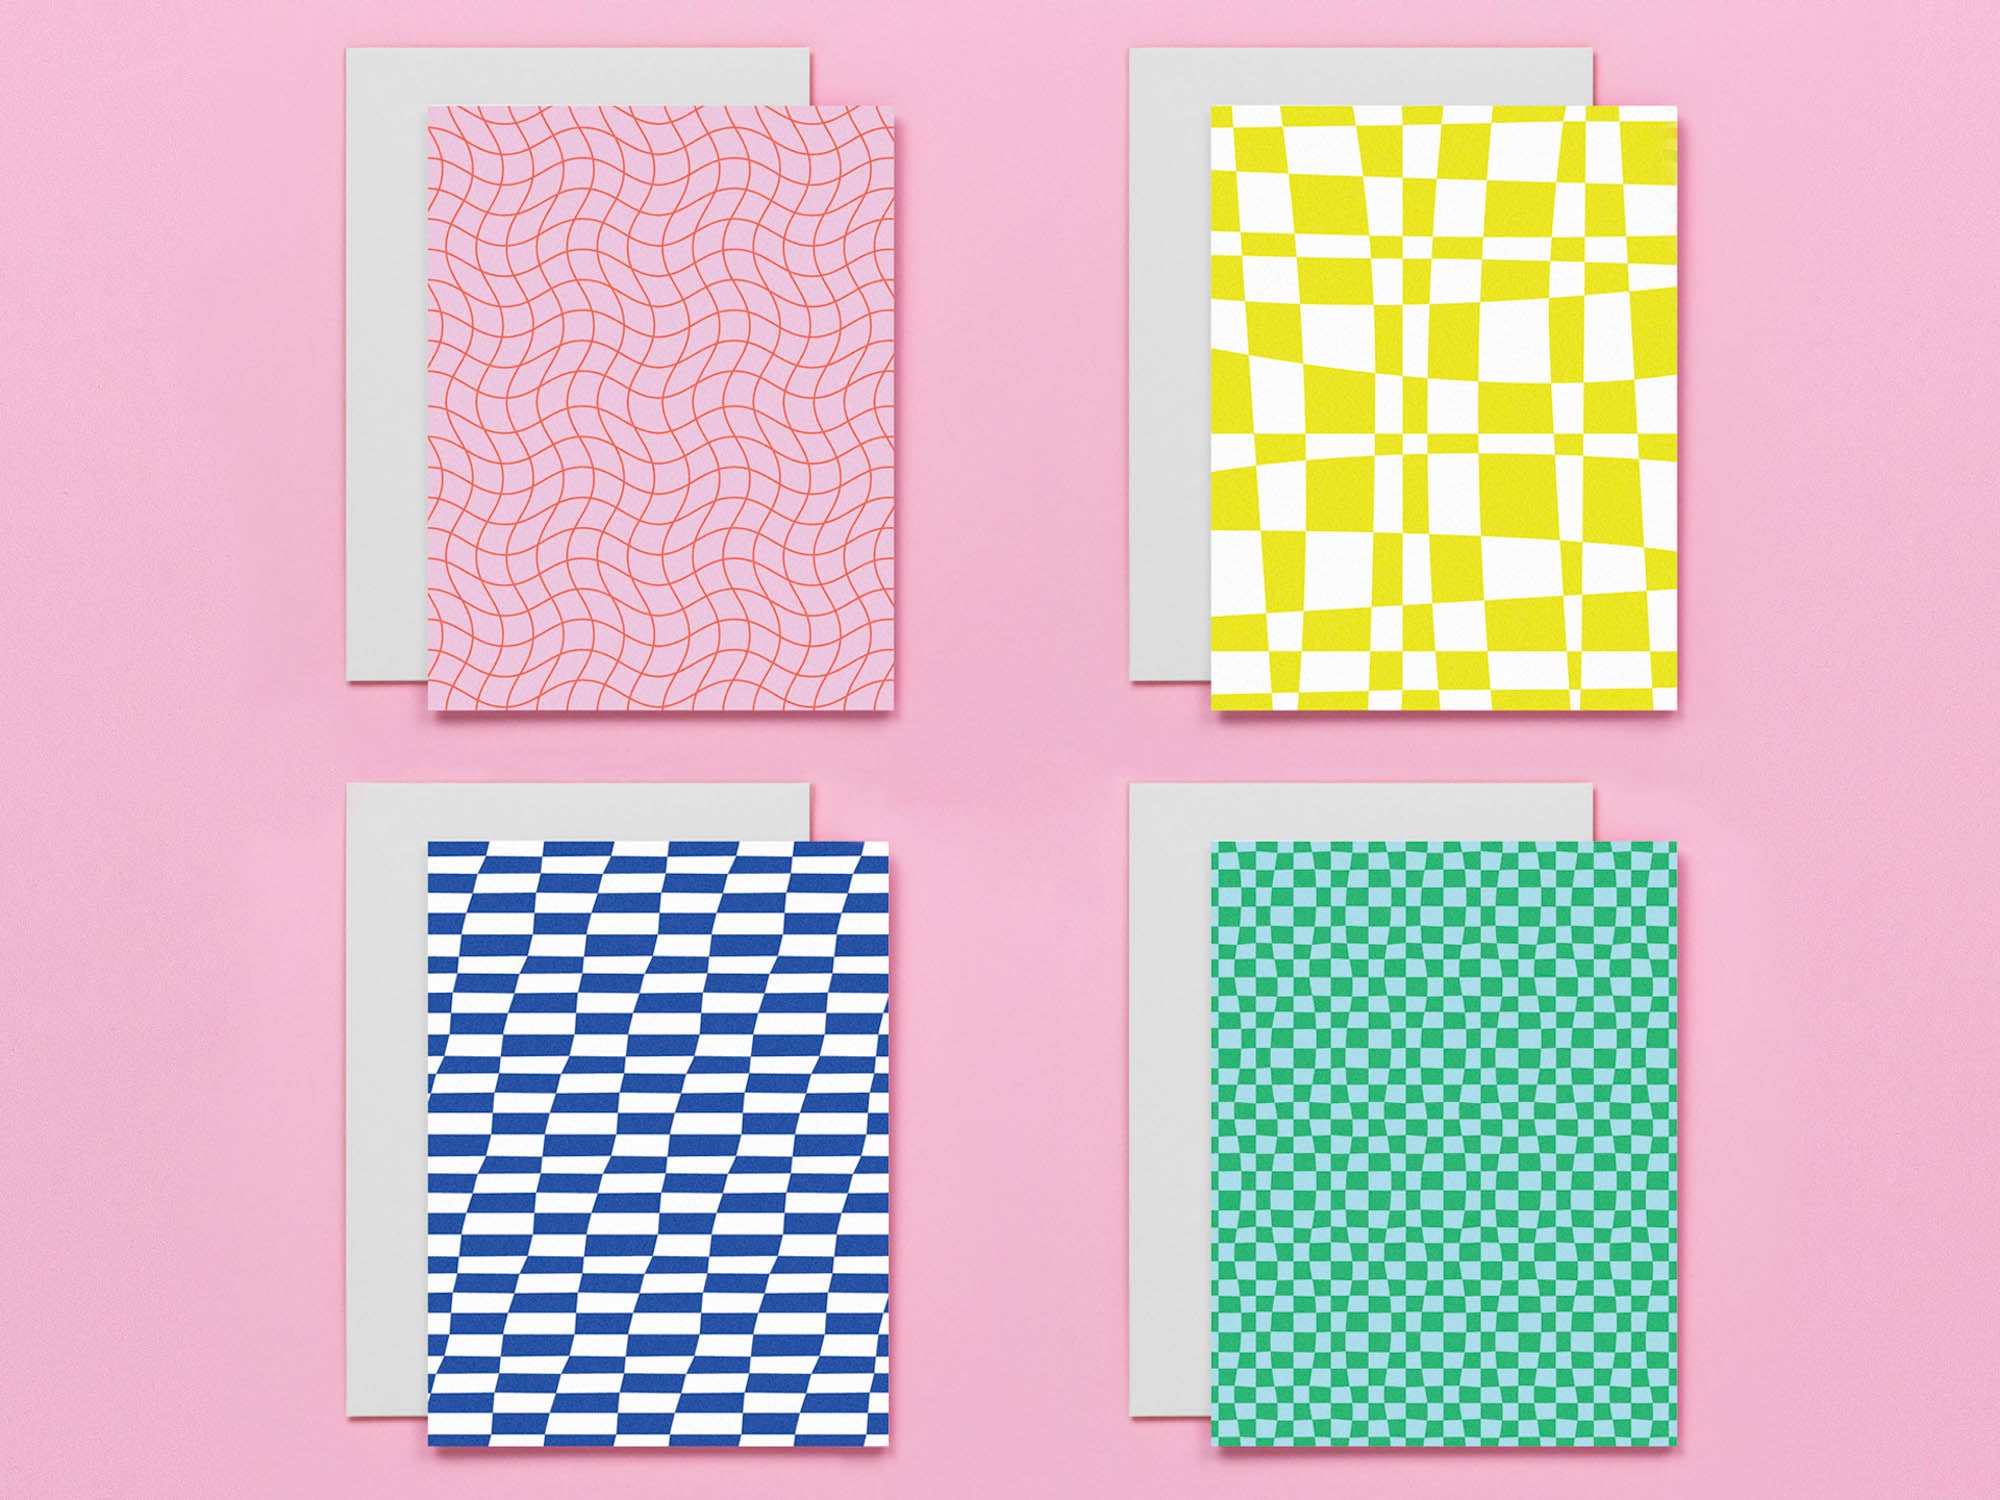 Set of 8 checker and grid pattern assorted blank greeting cards that bend space and time. Made in USA by @mydarlin_bk